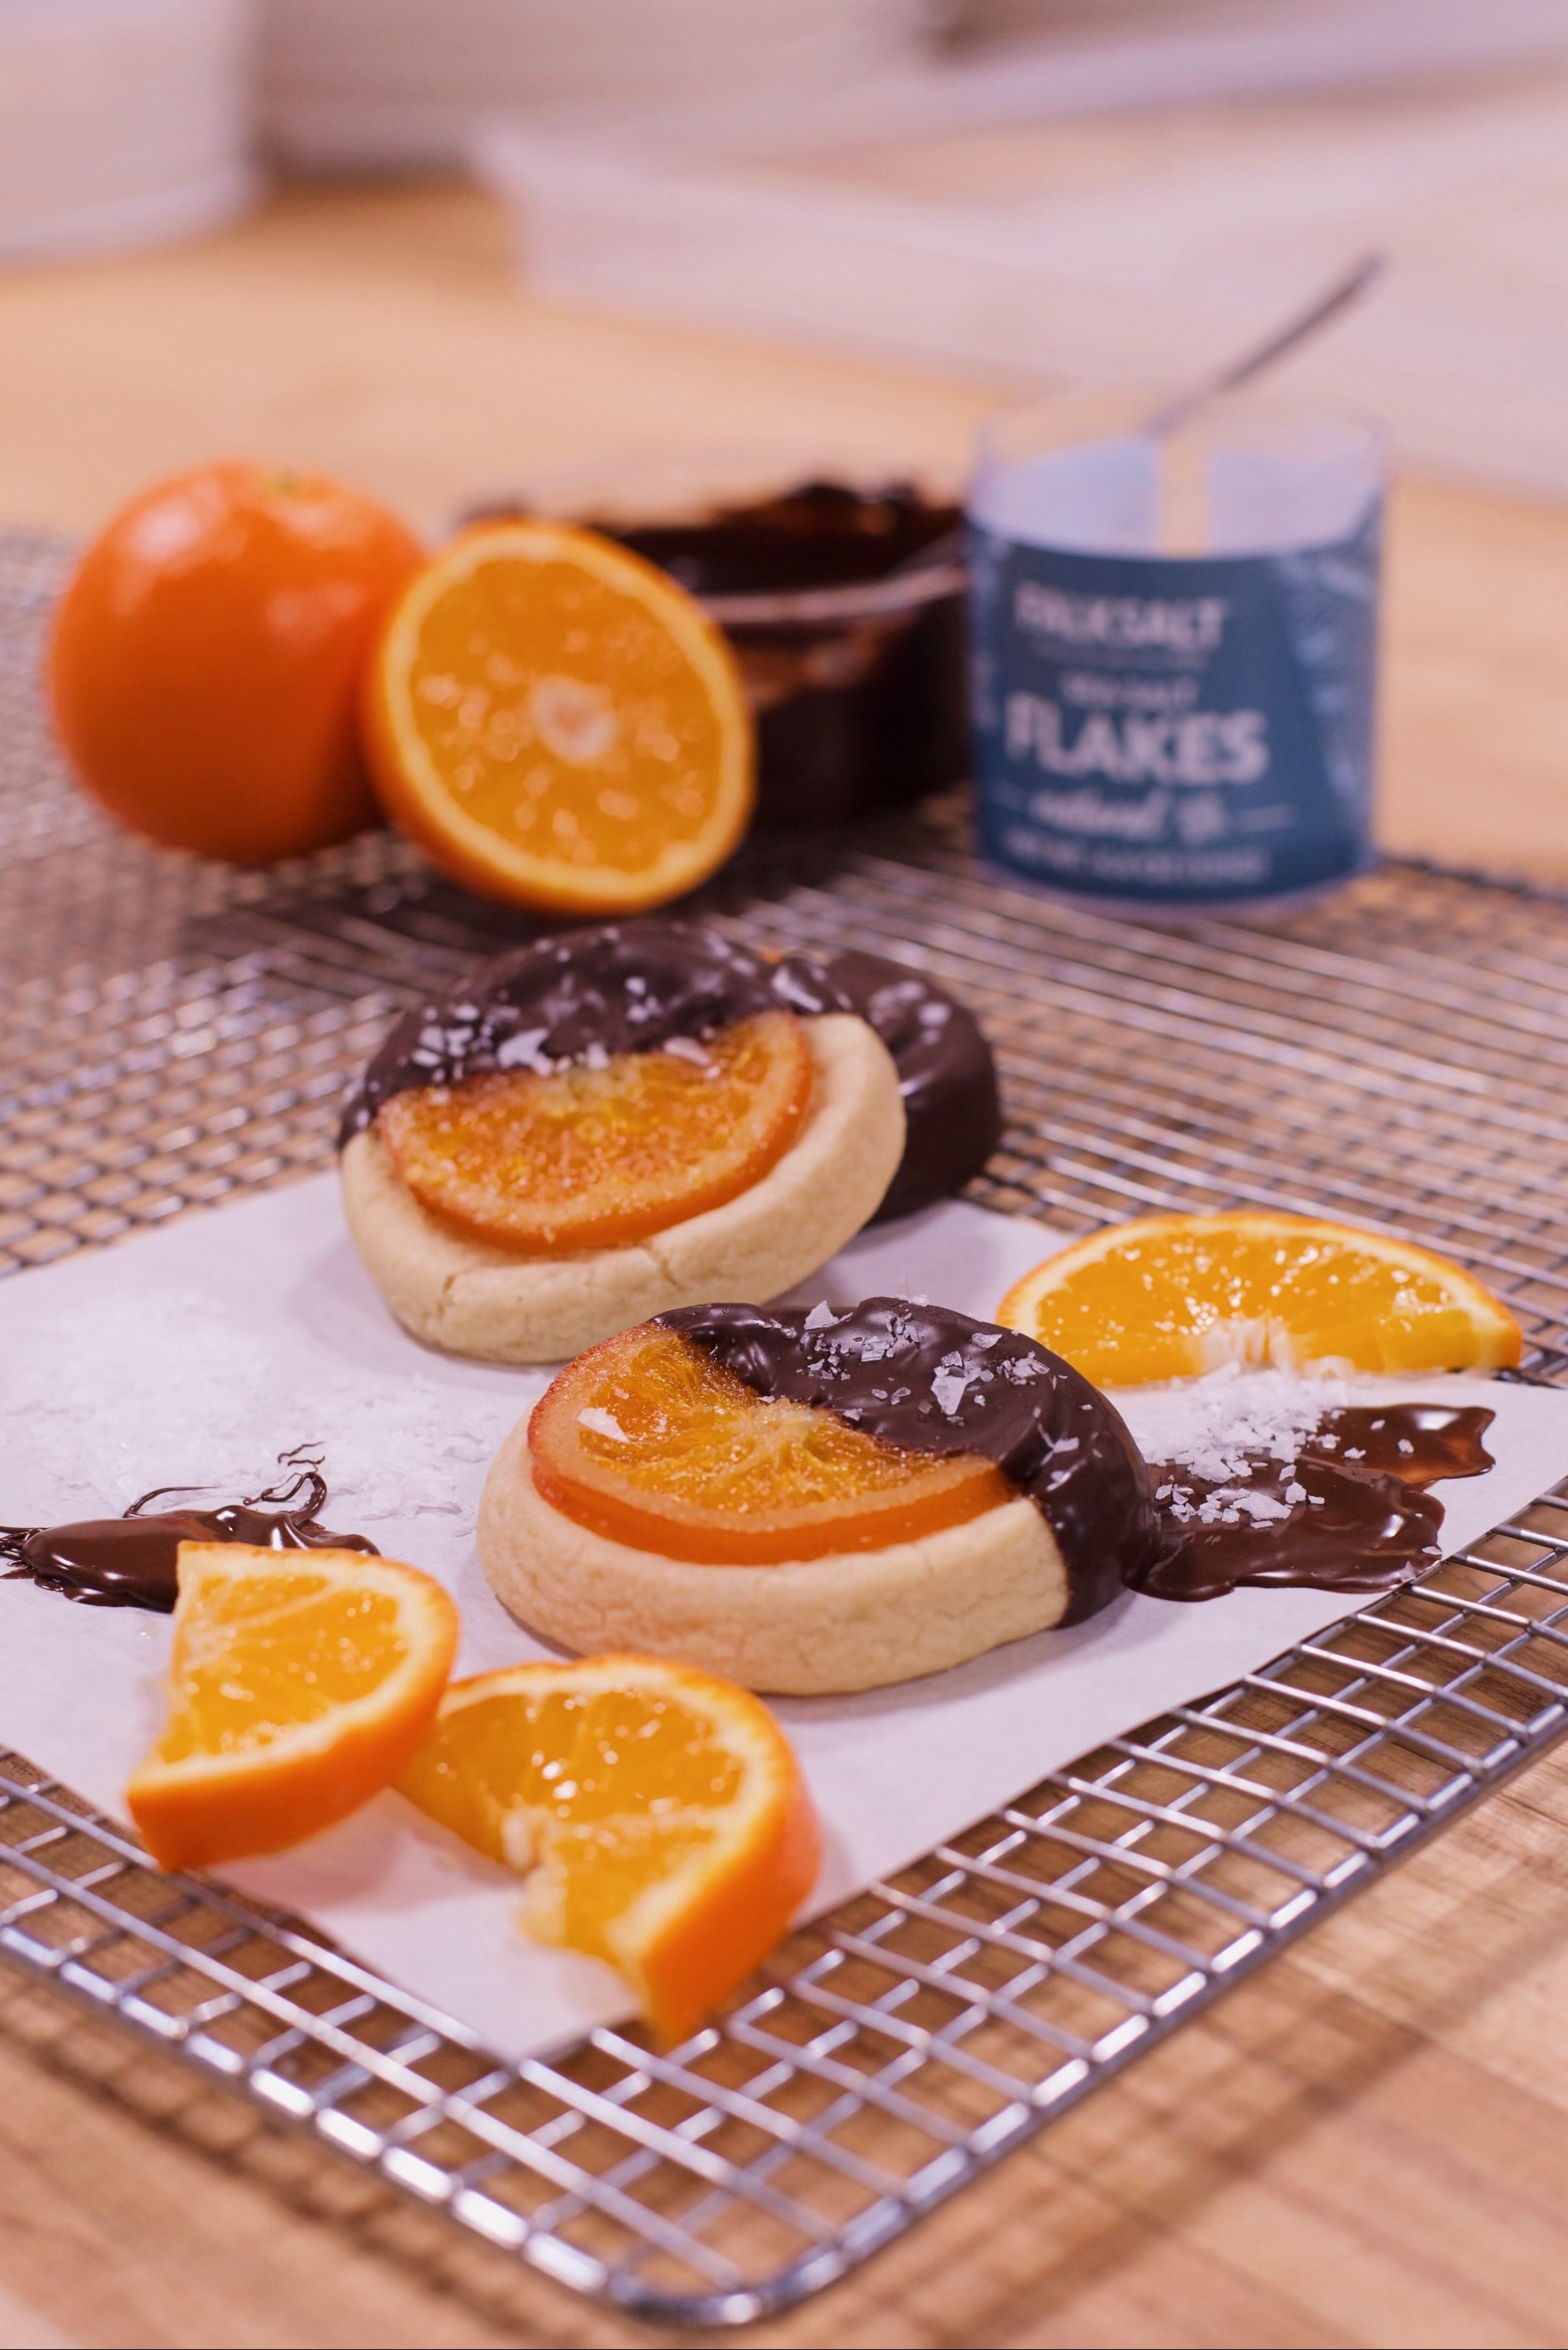 March FOTM Cookies (Salted Dark Chocolate + Candied Orange) - One time purchase